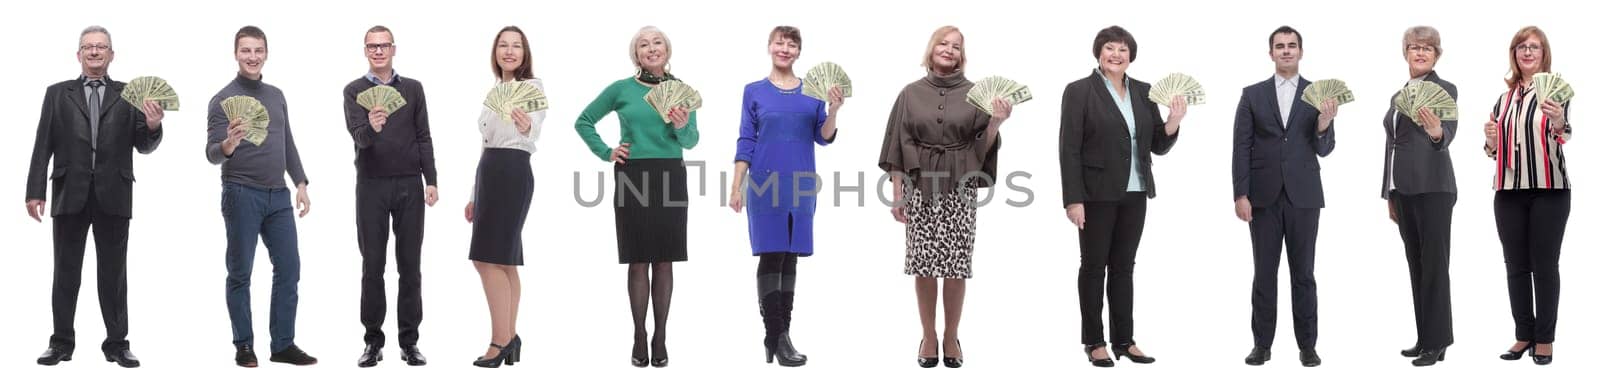 group of successful people holding money in hand isolated on white background